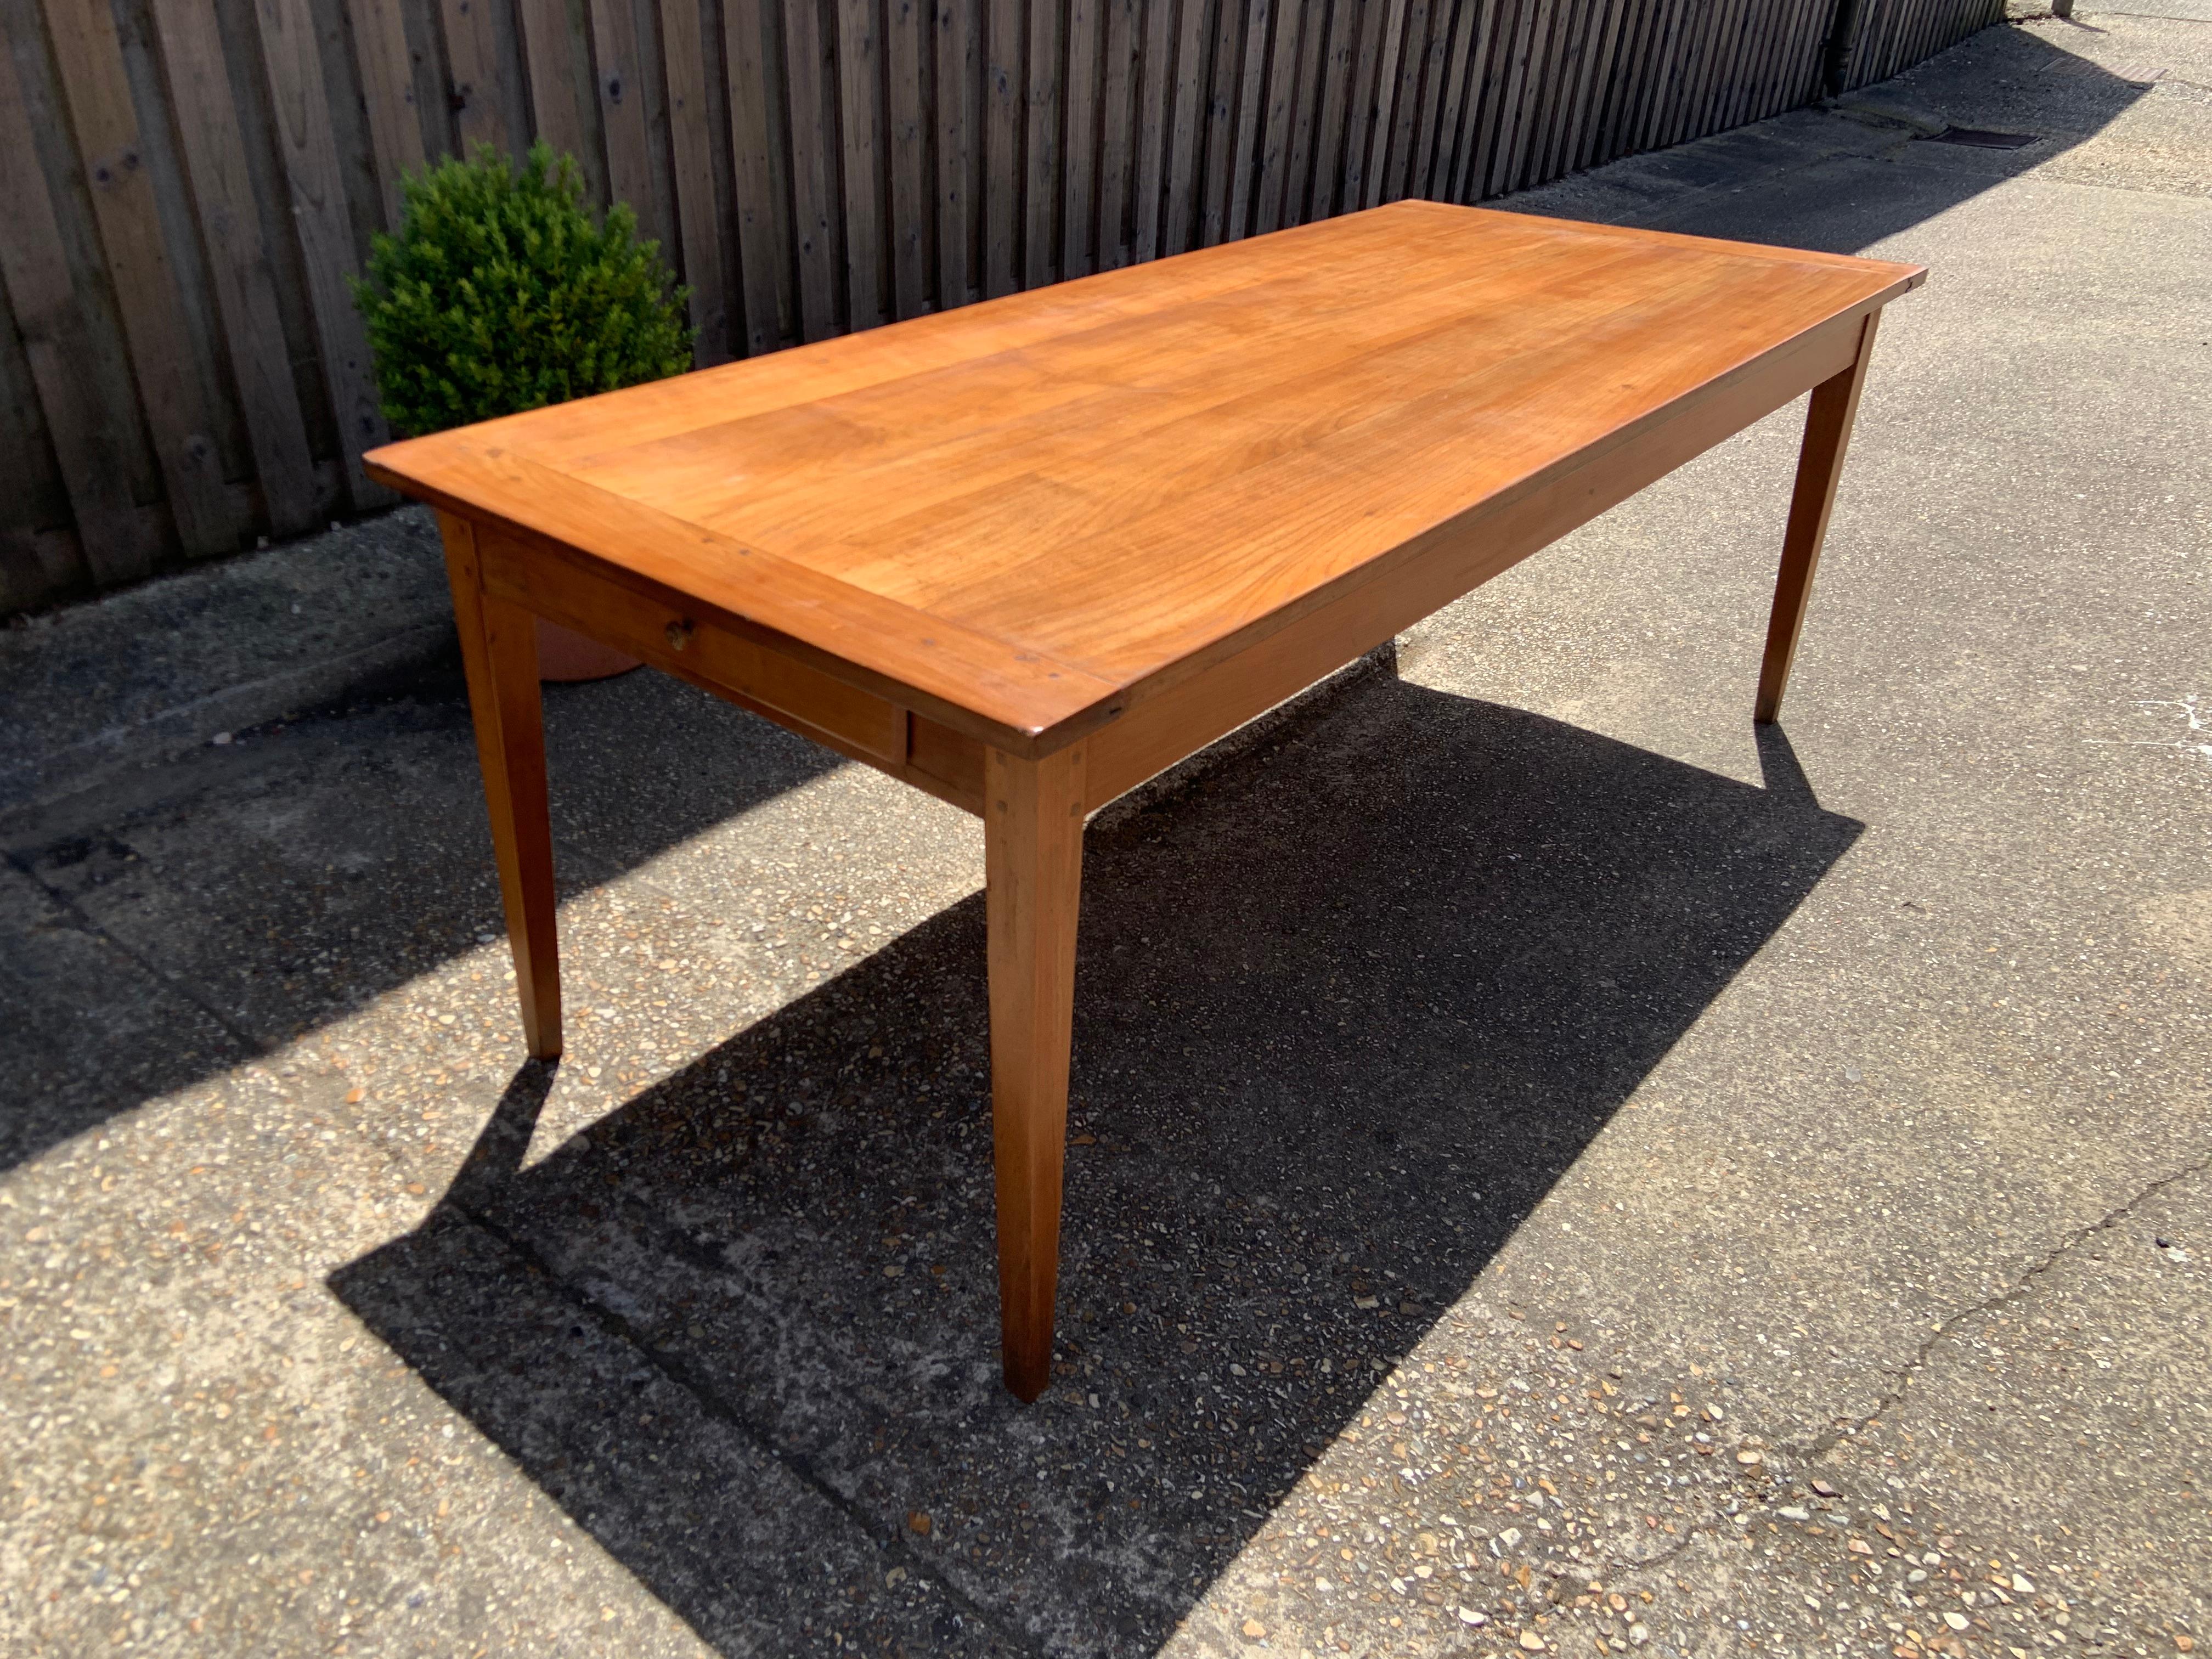 19th Century Antique Cherry Tapered Leg Dining Table with Drawer 